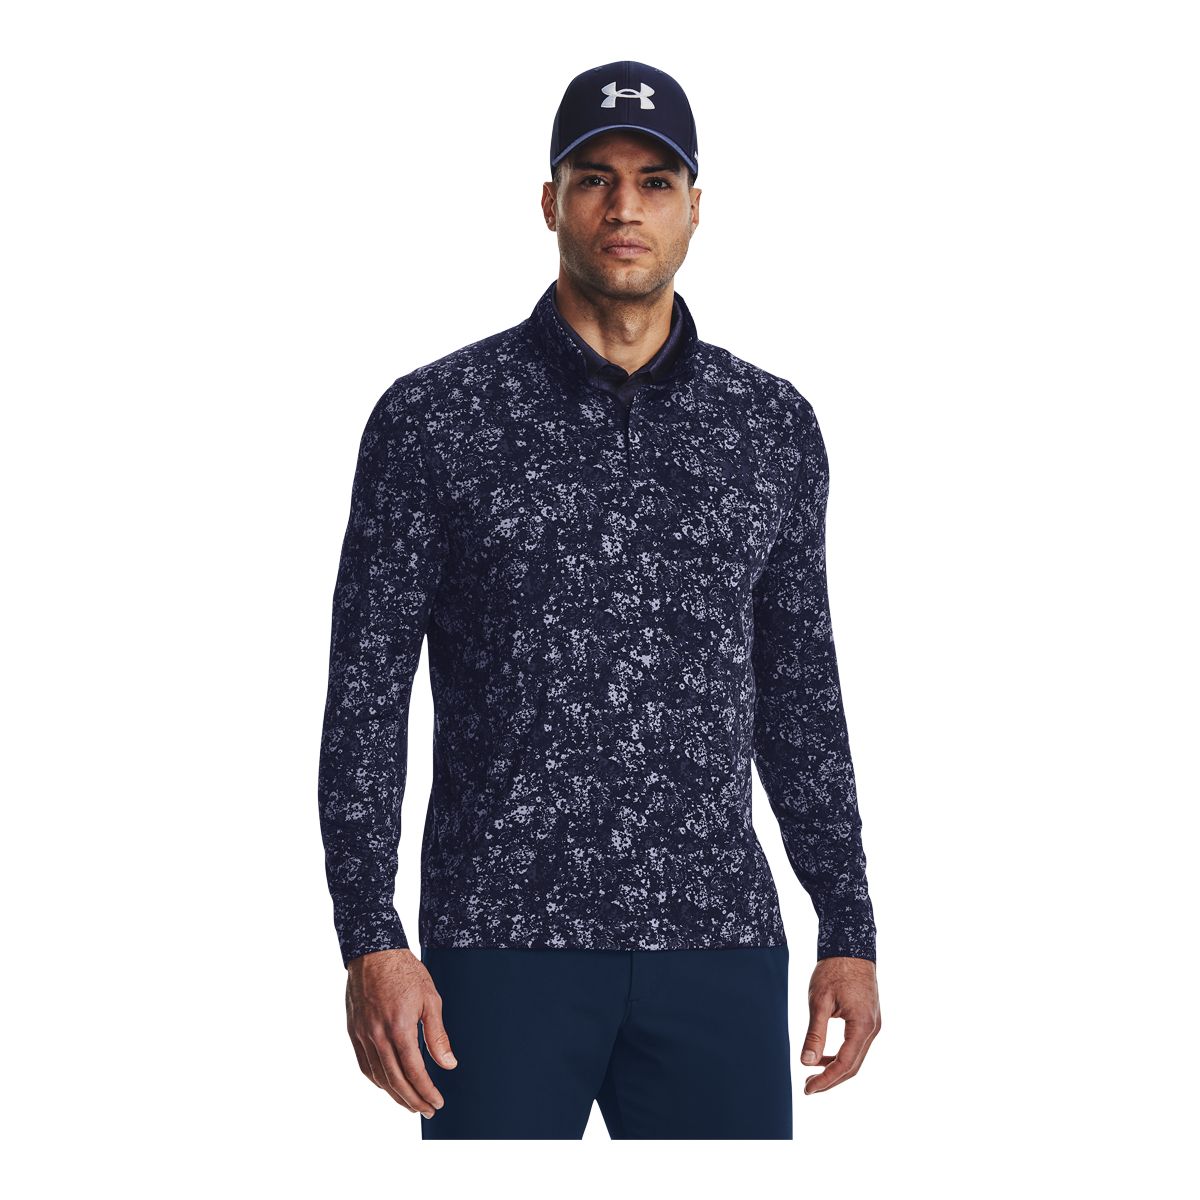 Under Armour Men's Playoff 1/4 Zip Novelty Polo T Shirt